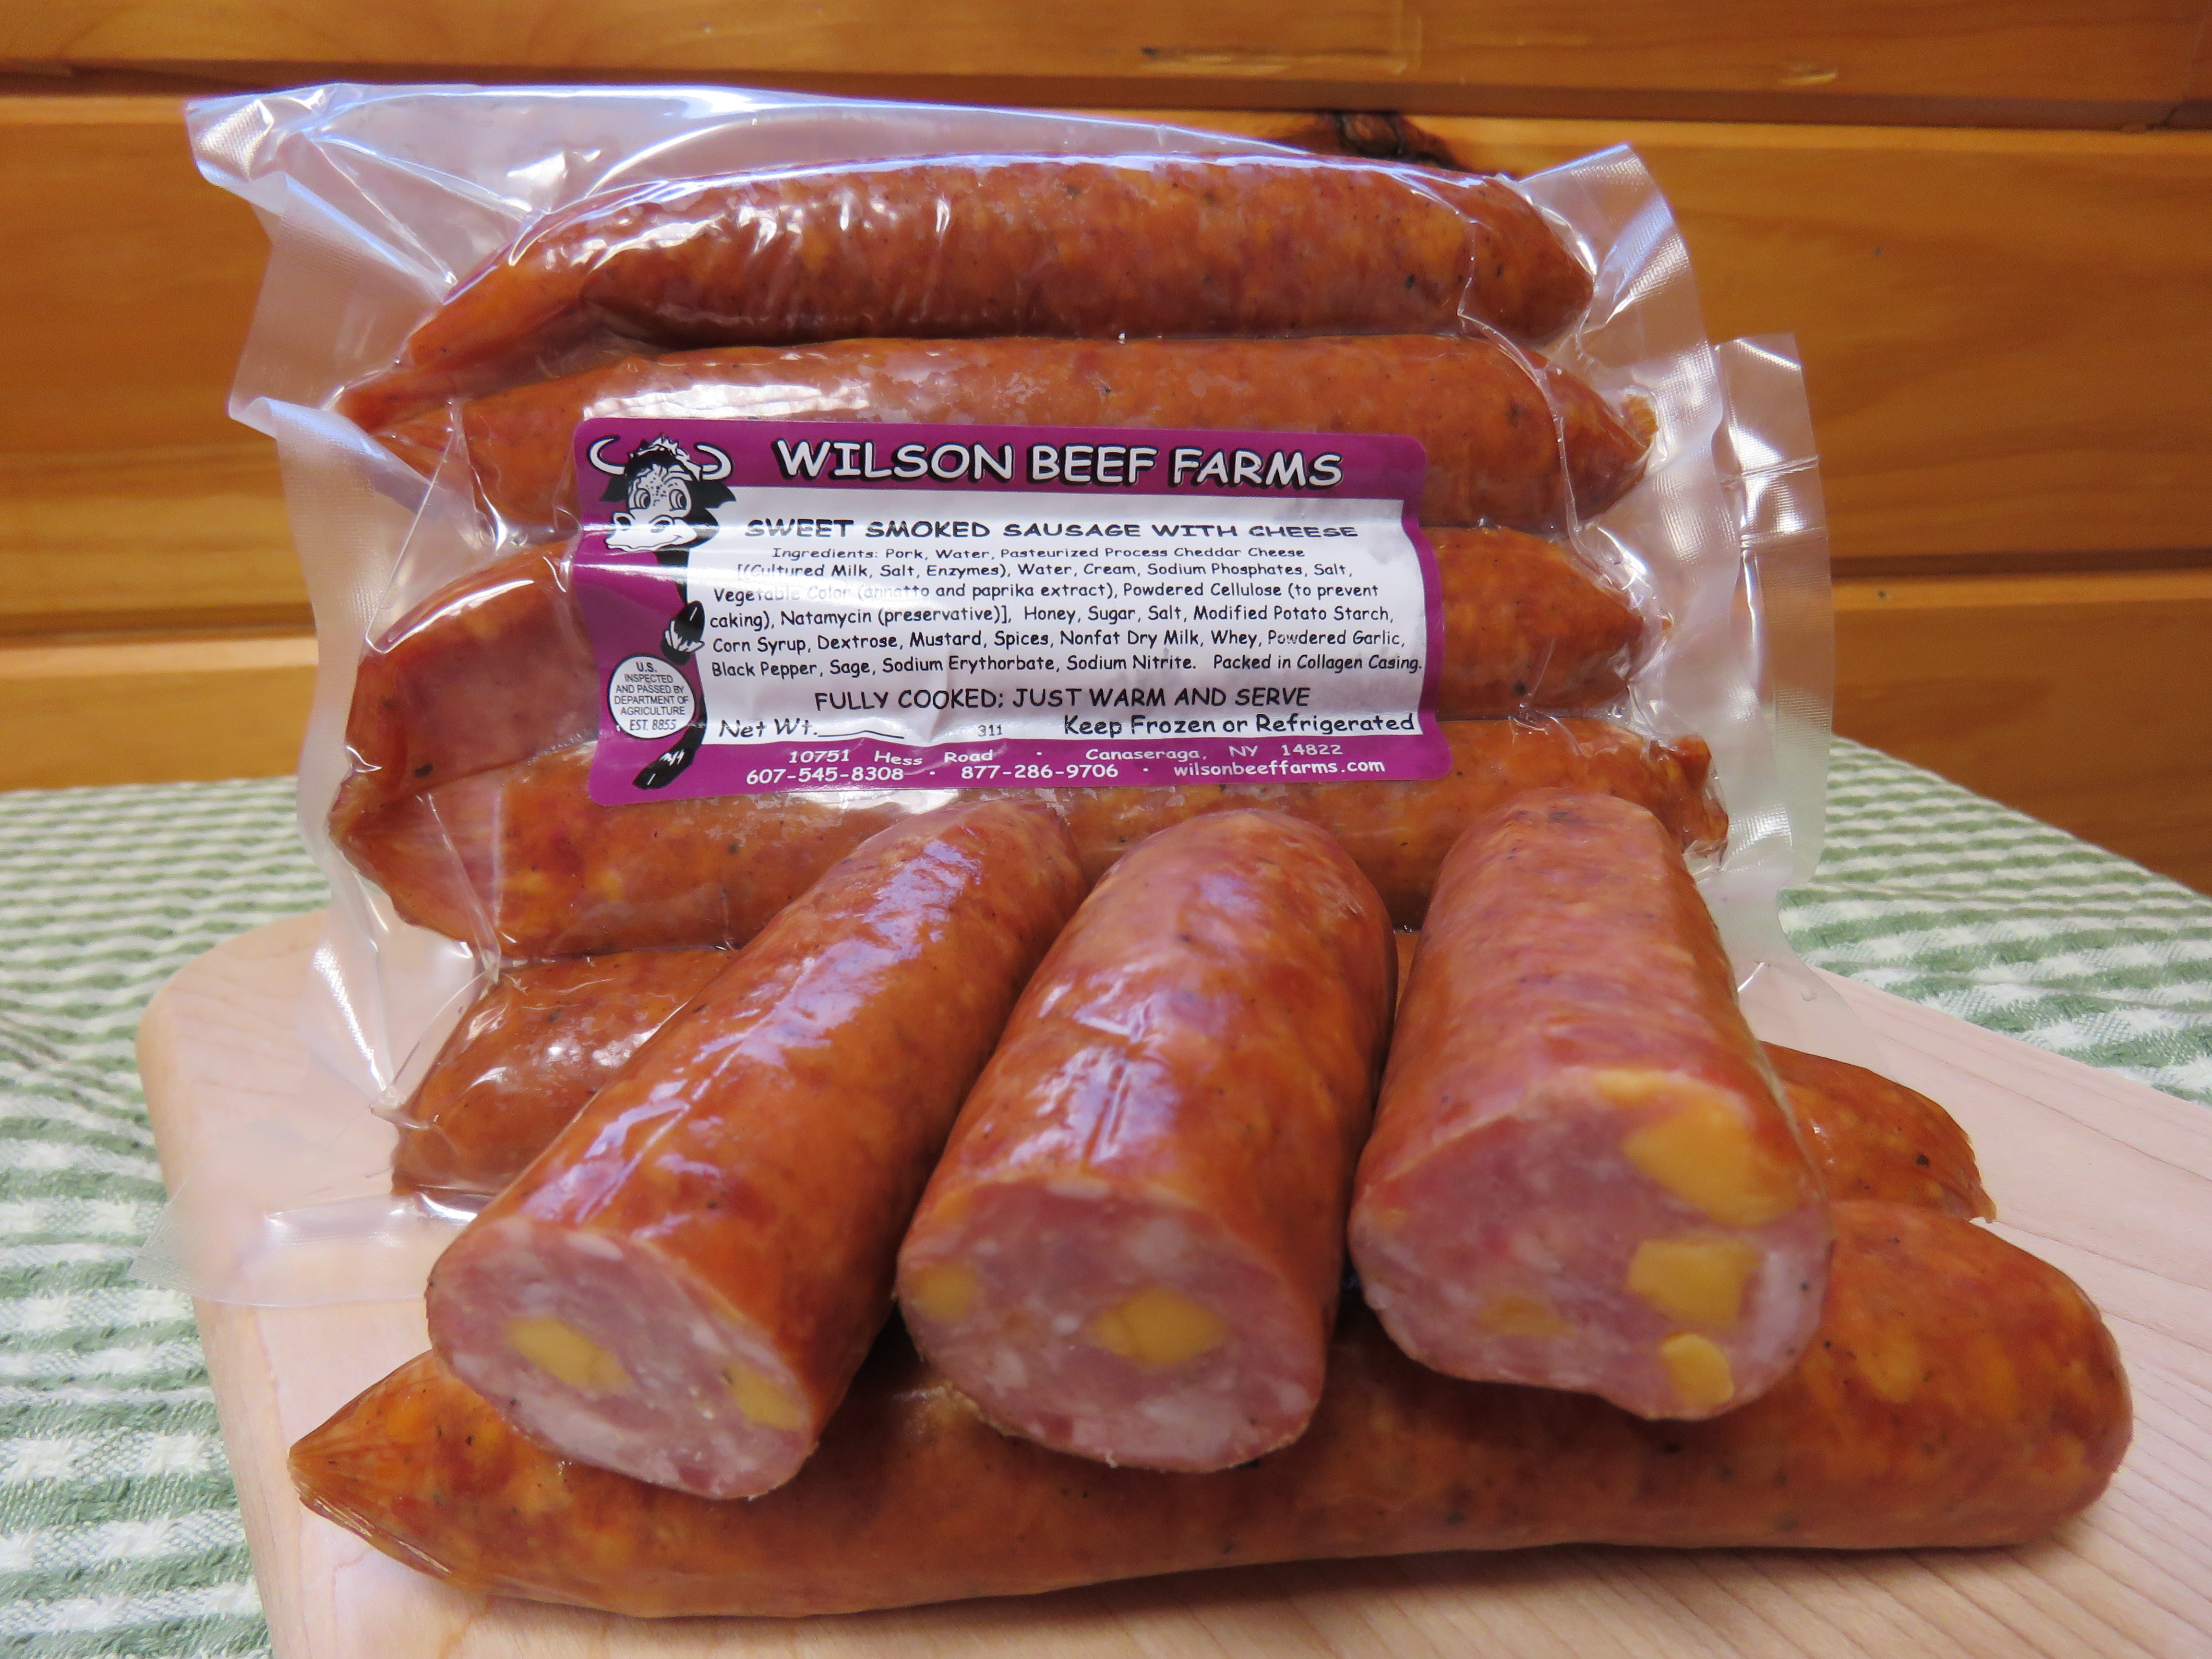 Sweet Smoked Sausage with Cheese 6.19/LB Wilson Beef Farms